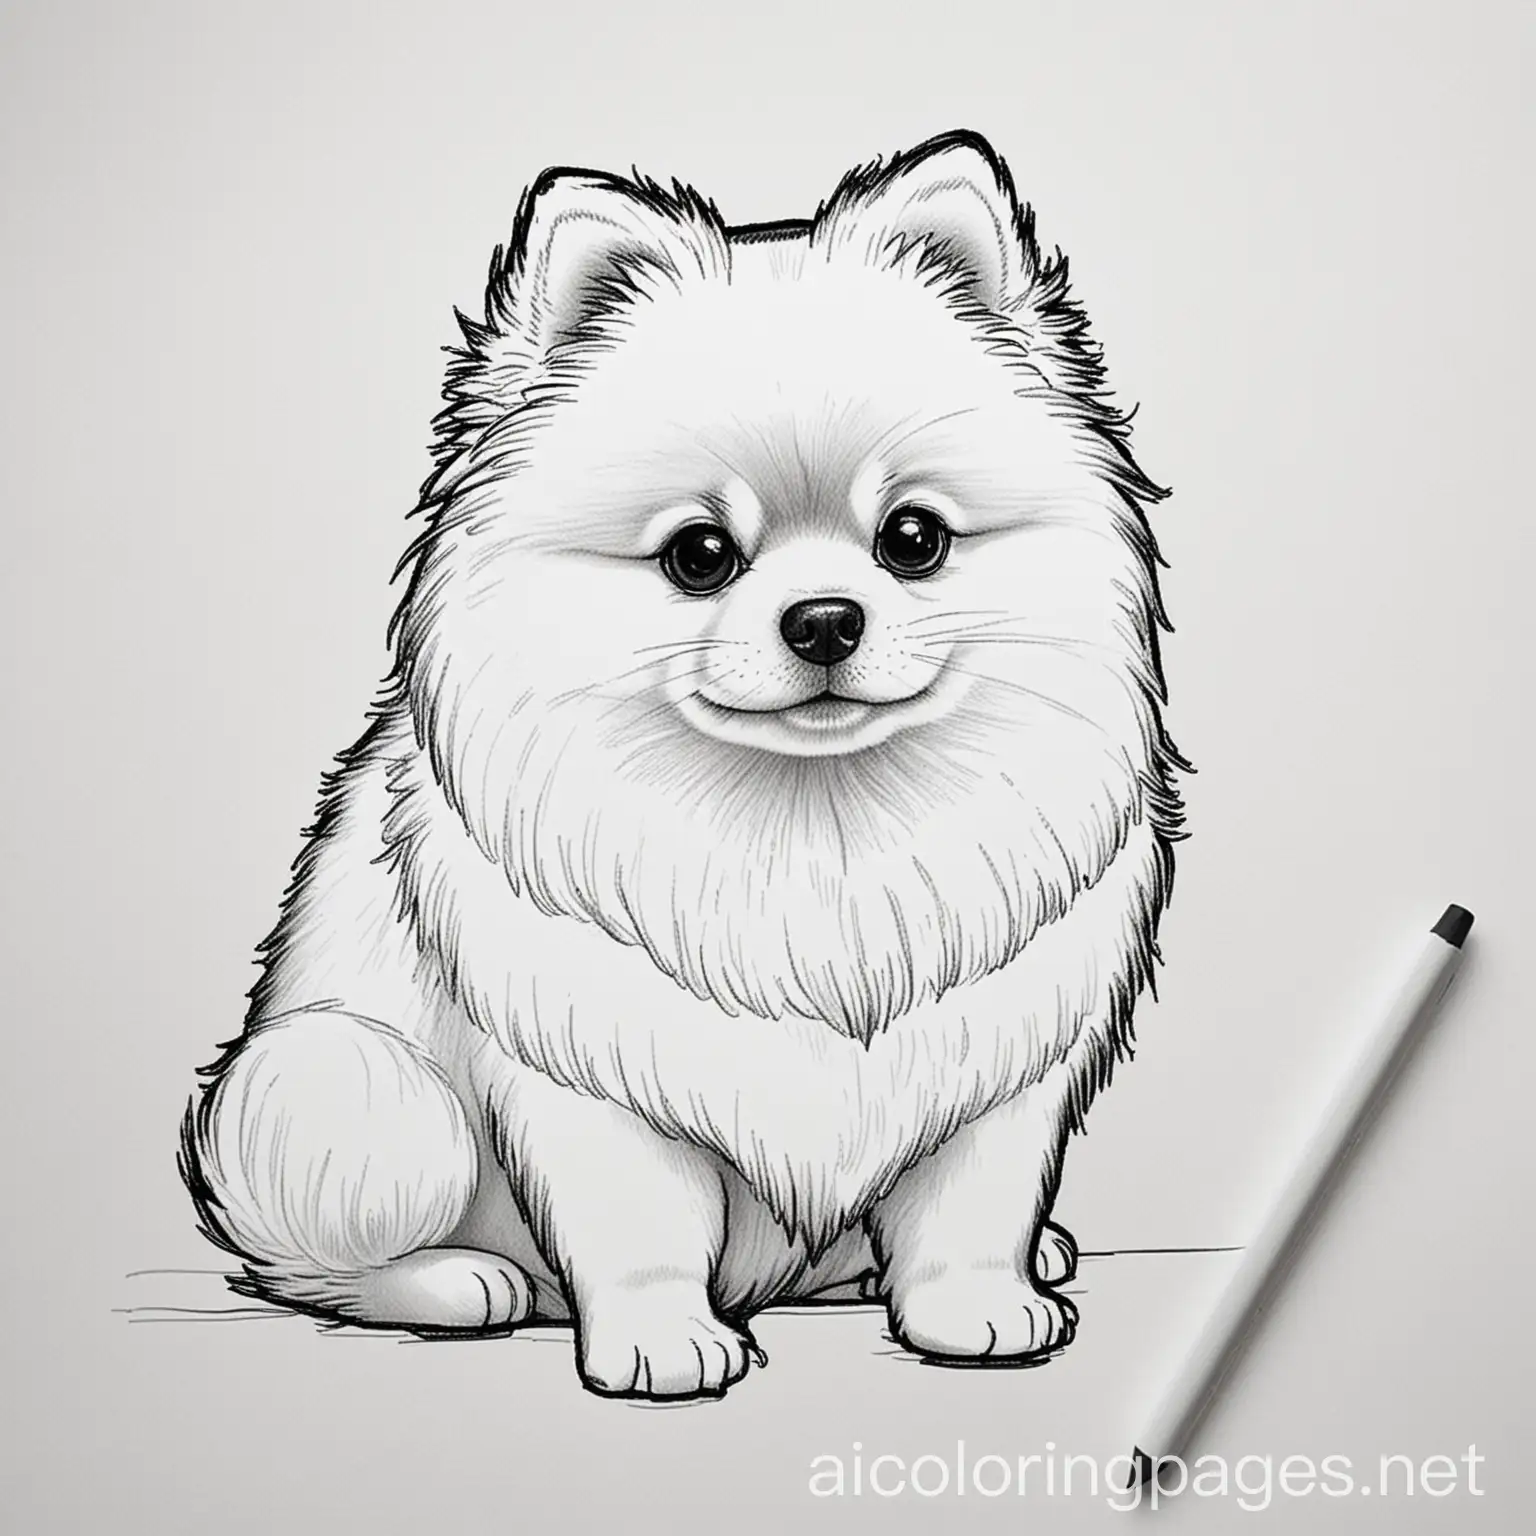 create a miniature Pomeranian dog, use squiggles, patterns, shapes and figures. Fit it in the whole page., Coloring Page, black and white, line art, white background, Simplicity, Ample White Space. The background of the coloring page is plain white to make it easy for young children to color within the lines. The outlines of all the subjects are easy to distinguish, making it simple for kids to color without too much difficulty, Coloring Page, black and white, line art, white background, Simplicity, Ample White Space. The background of the coloring page is plain white to make it easy for young children to color within the lines. The outlines of all the subjects are easy to distinguish, making it simple for kids to color without too much difficulty